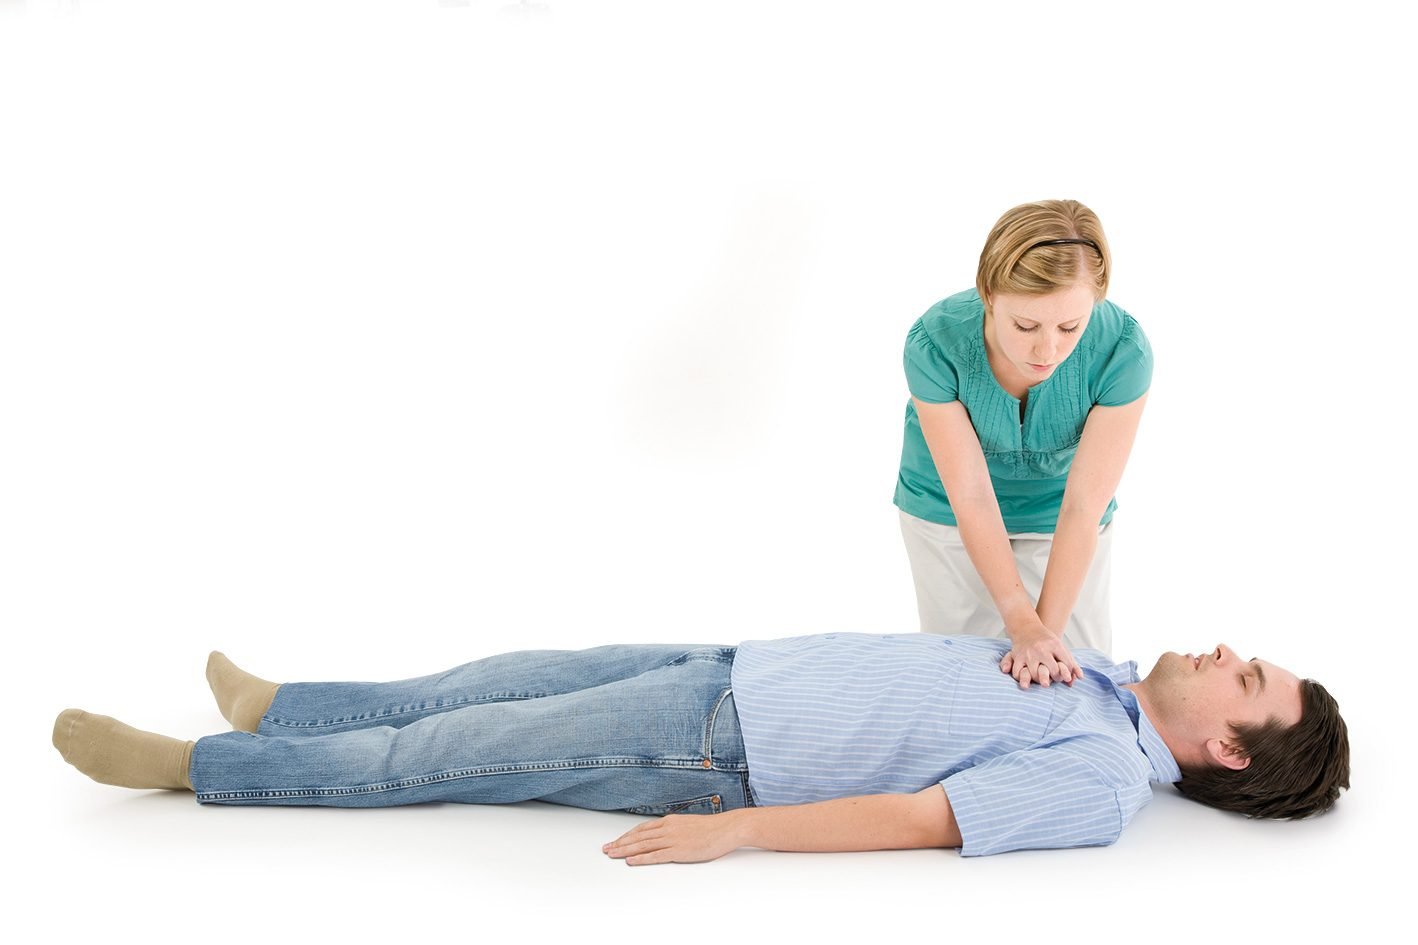 The CPR Steps Everyone Should Know